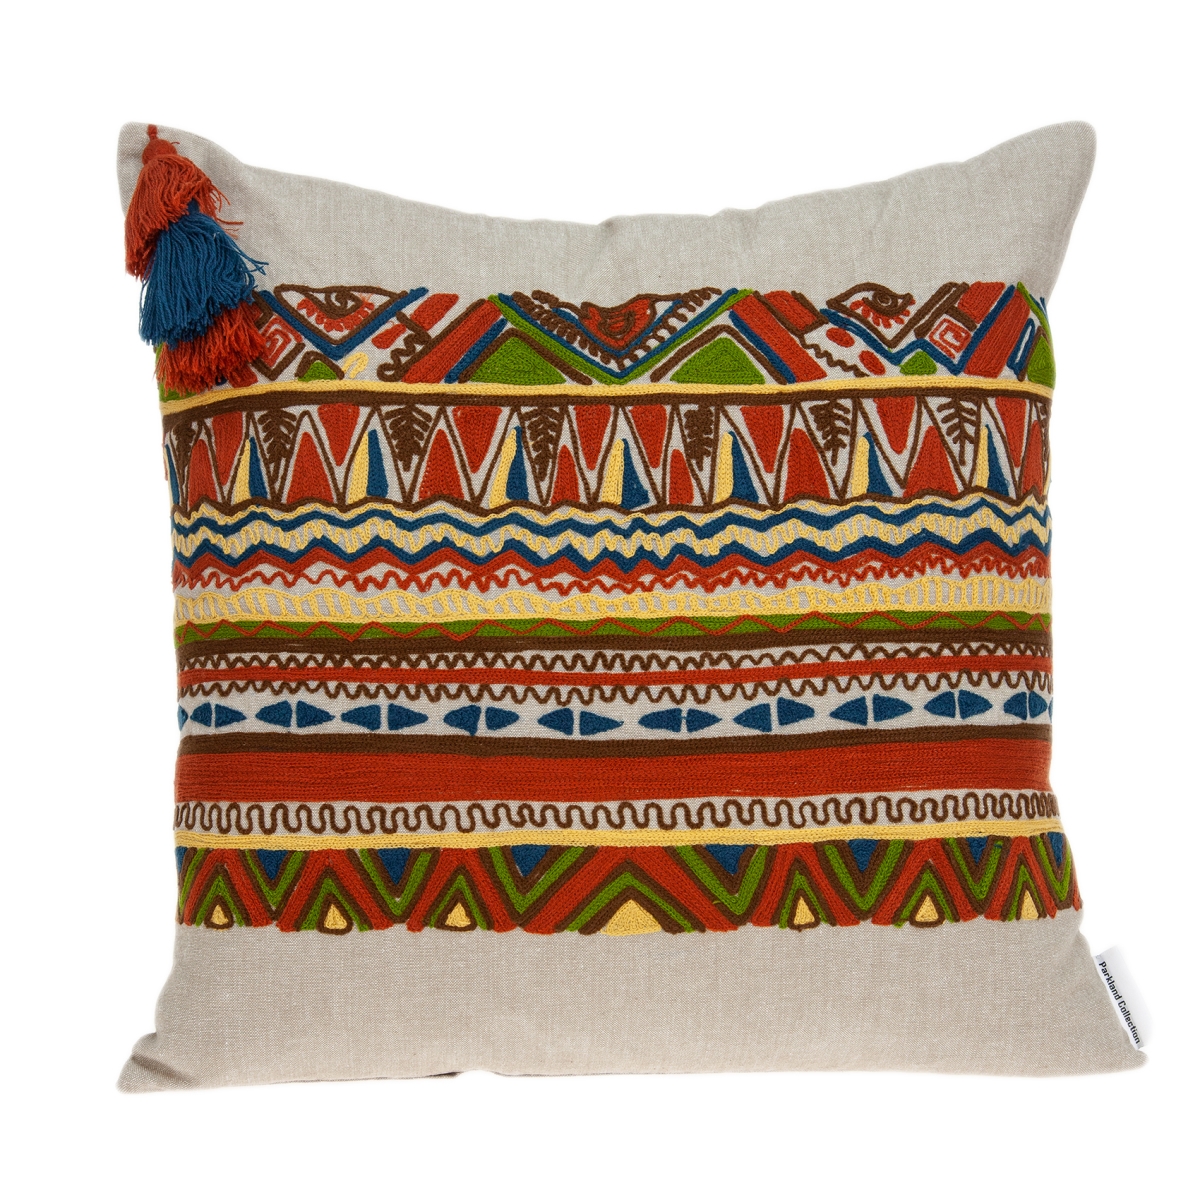 Pild11124d Zelda Multi Color Square Bohemian Pillow Cover With Down Insert - 20 X 20 X 7 In.